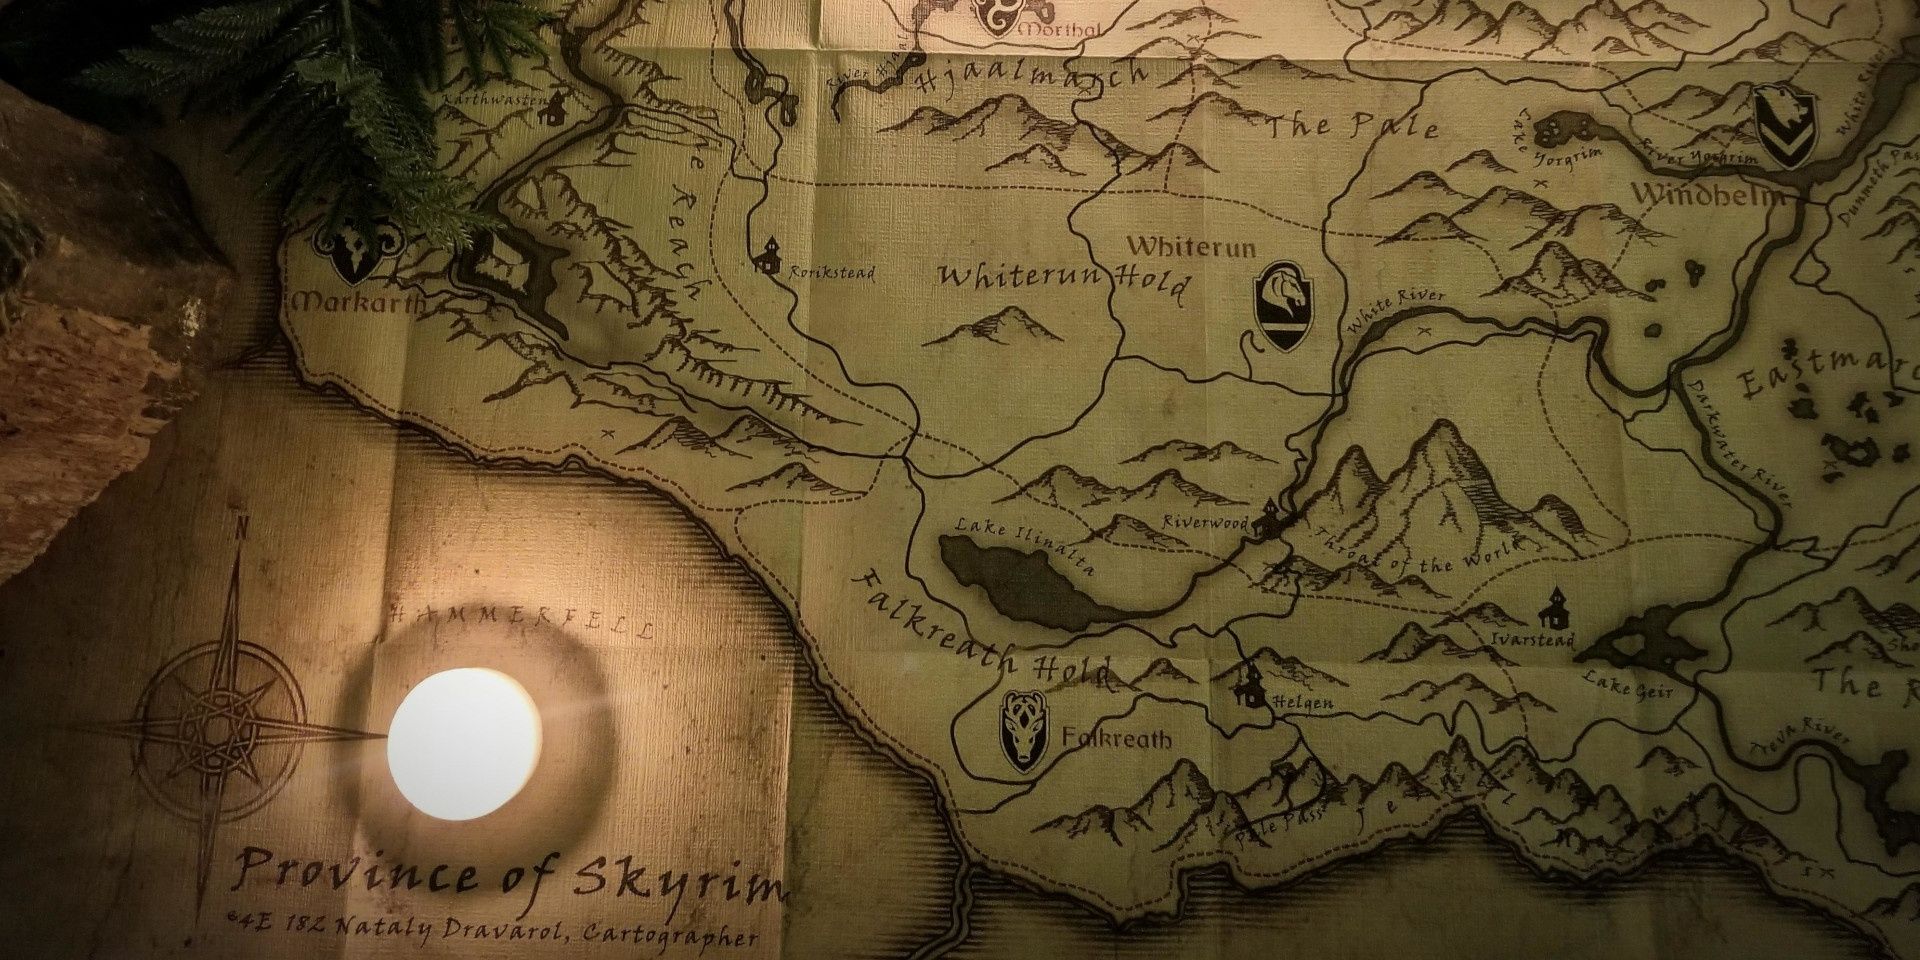 Map Clue From Twitter Hinting At Hammerfell As Next Setting For Elder Scrolls 6